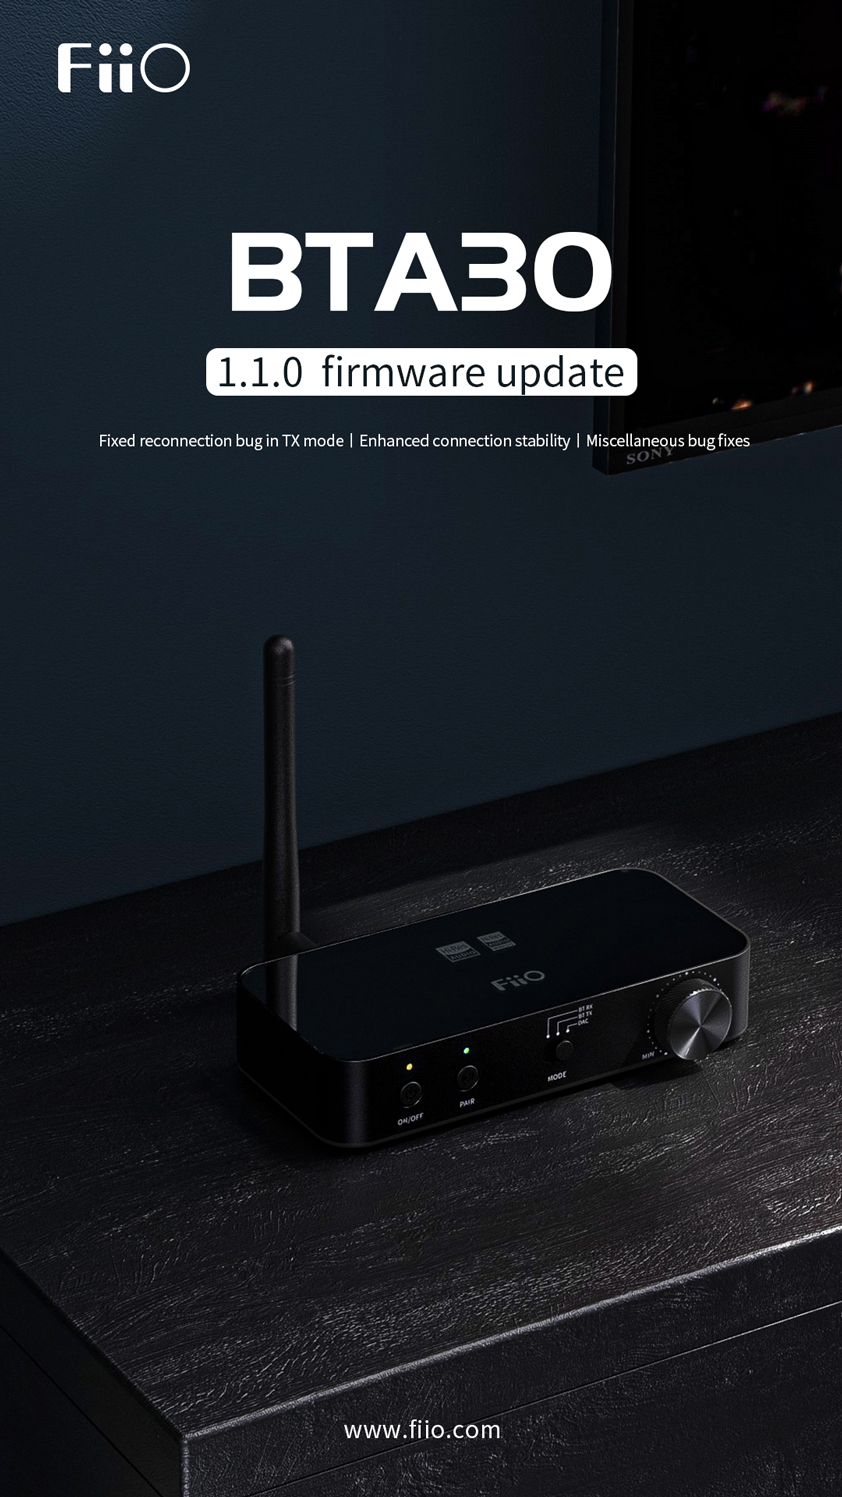 New firmware] The new firmware FW1.1 for BTA30 is now available 